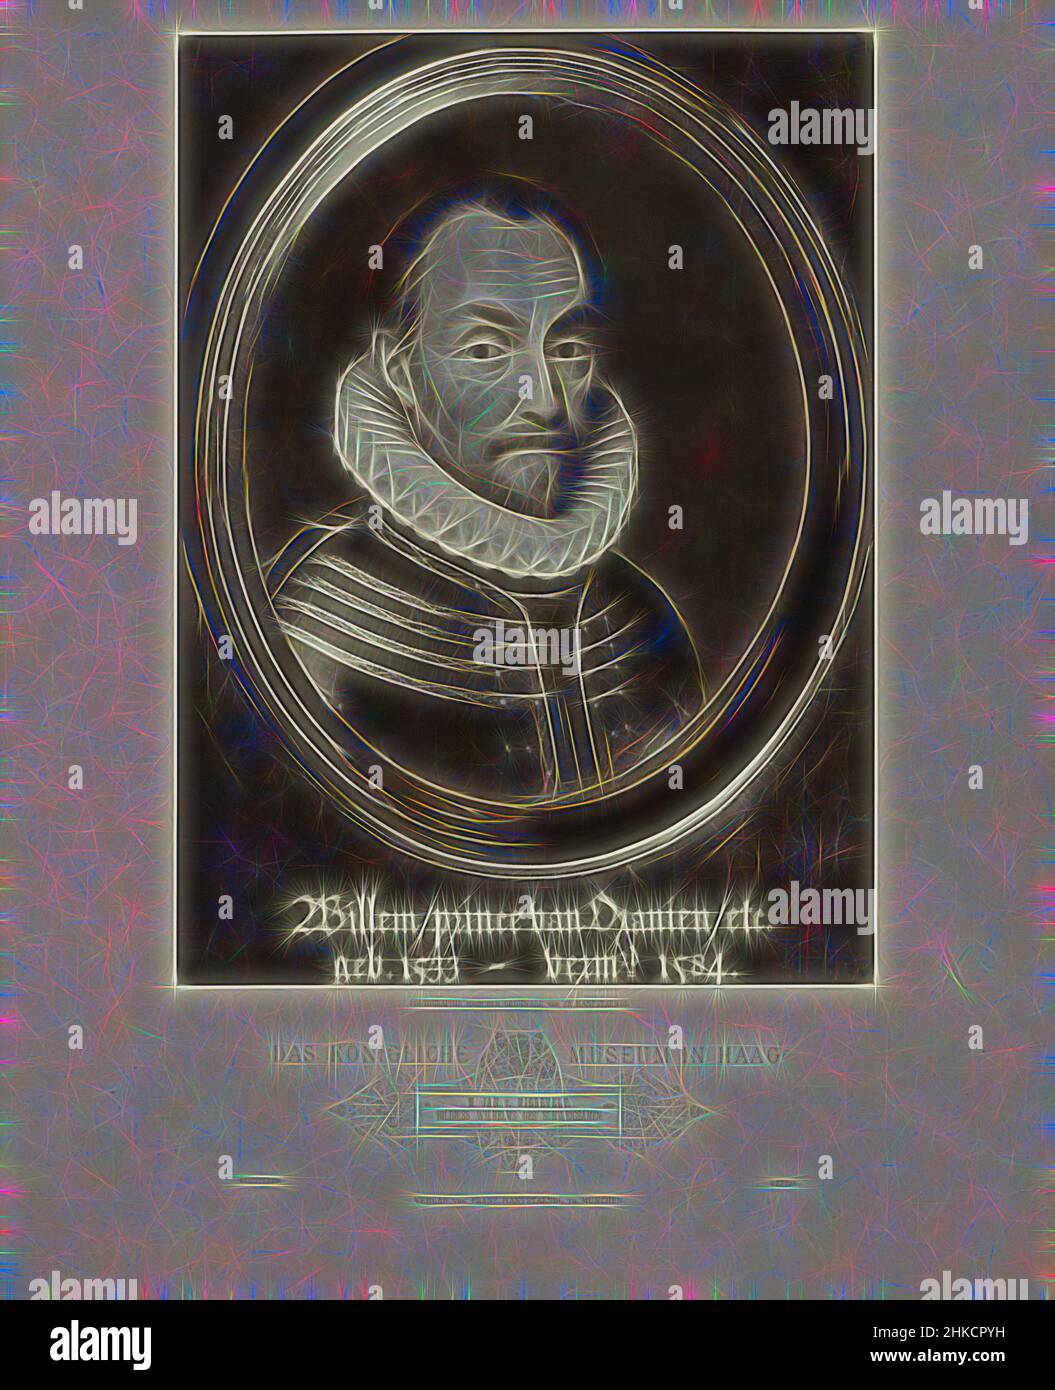 Inspired by Portrait of William I, Prince of Orange, Portrait of William I in an oval. In the lower margin his name, titles, year of birth and year of death. In an ornamented frame his name in German., Franz Hanfstaengl, after: Michiel Jansz van Mierevelt, München, 1852 - 1877, height 395 mm × width, Reimagined by Artotop. Classic art reinvented with a modern twist. Design of warm cheerful glowing of brightness and light ray radiance. Photography inspired by surrealism and futurism, embracing dynamic energy of modern technology, movement, speed and revolutionize culture Stock Photo